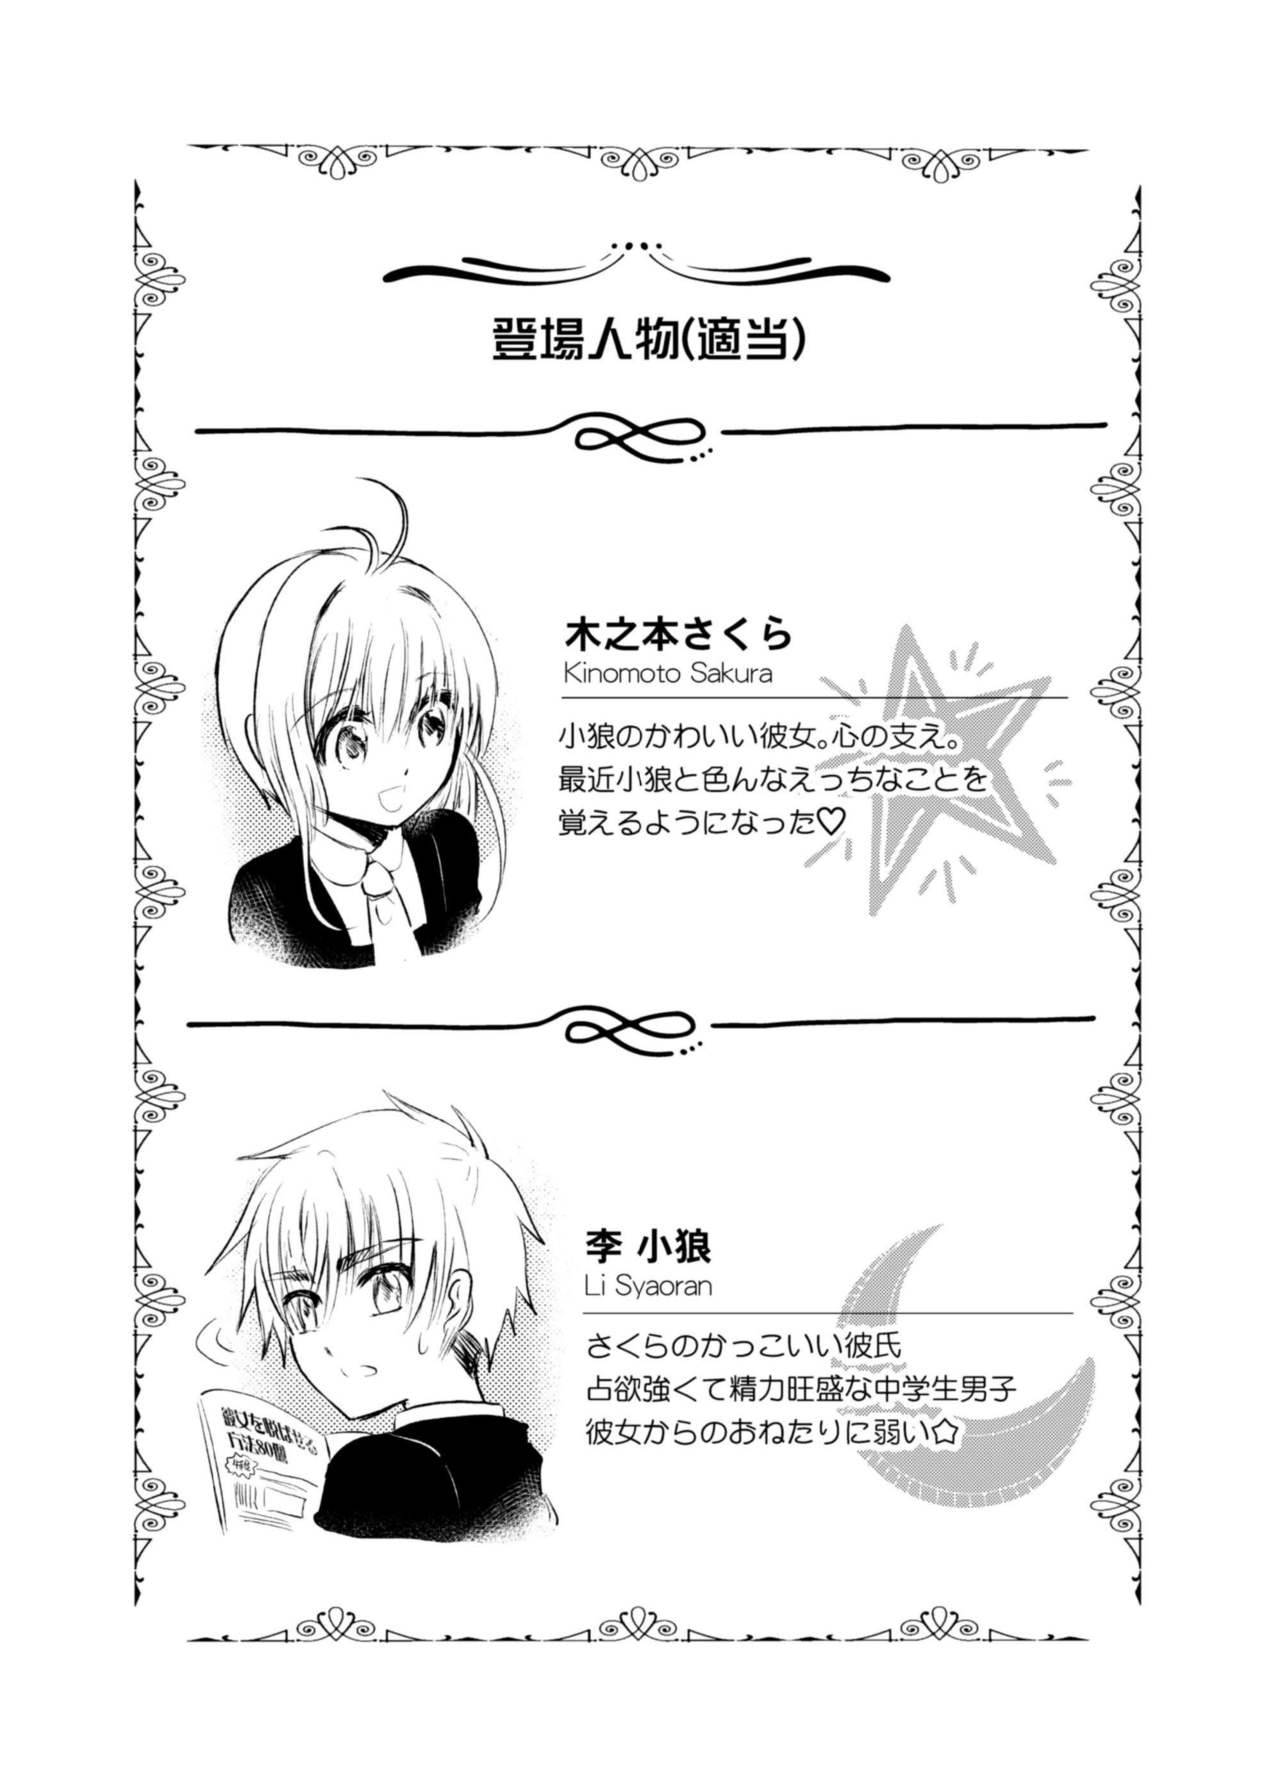 [Maple of Forest (Kaede Sago)] Give and Take (Cardcaptor Sakura) [Chinese] [新桥月白日语社] [Digital] page 5 full